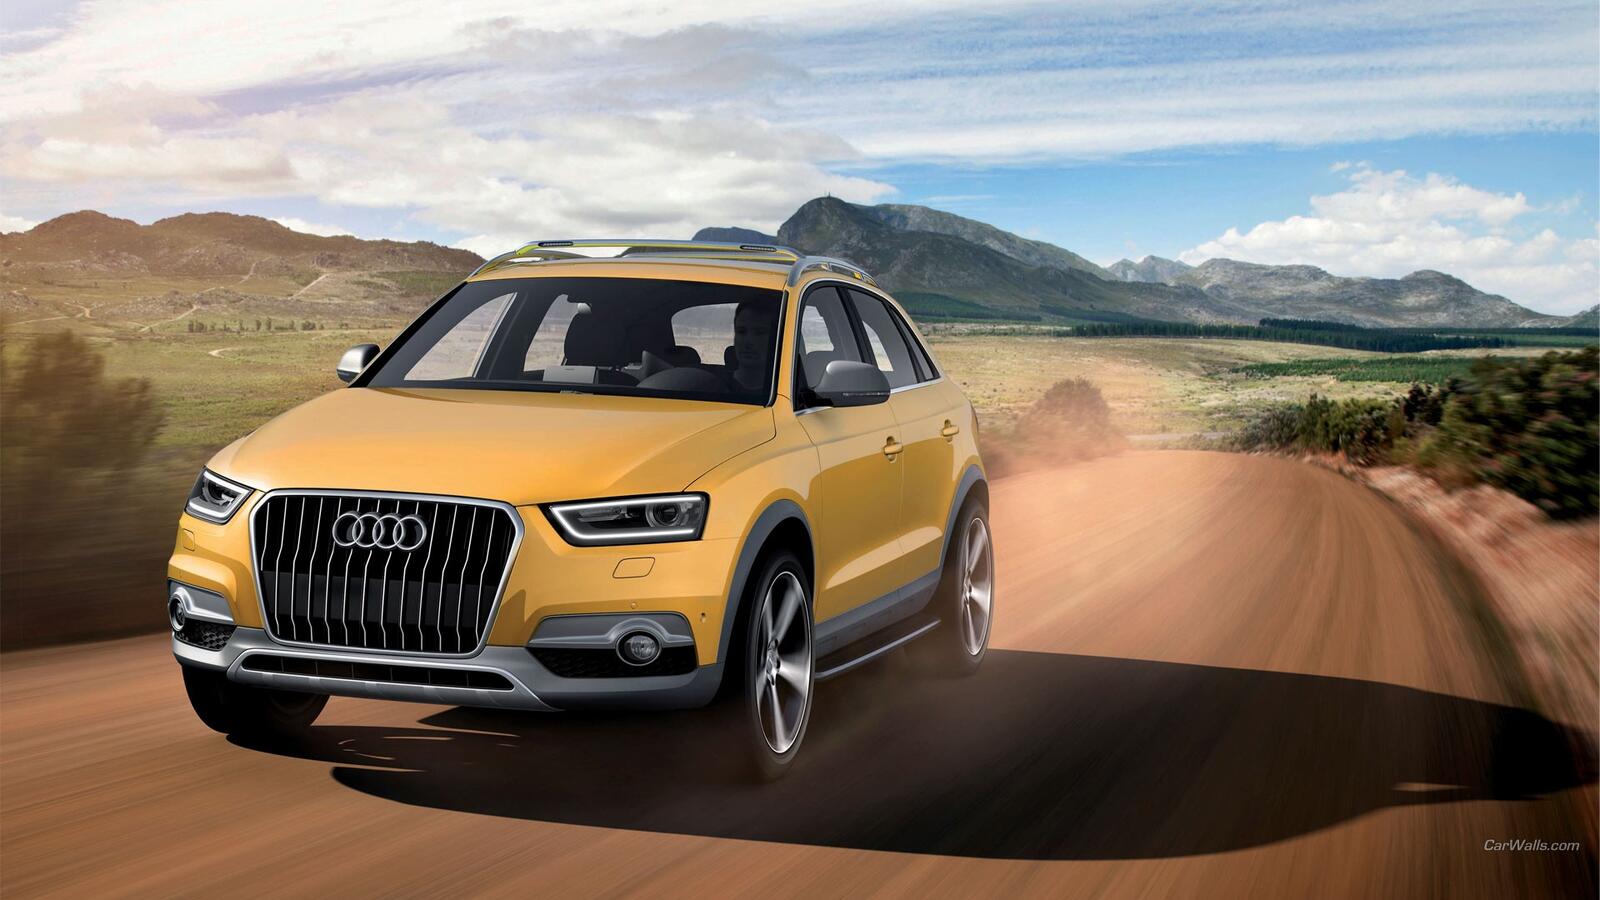 Free photo Audi Q3 driving on a dusty road